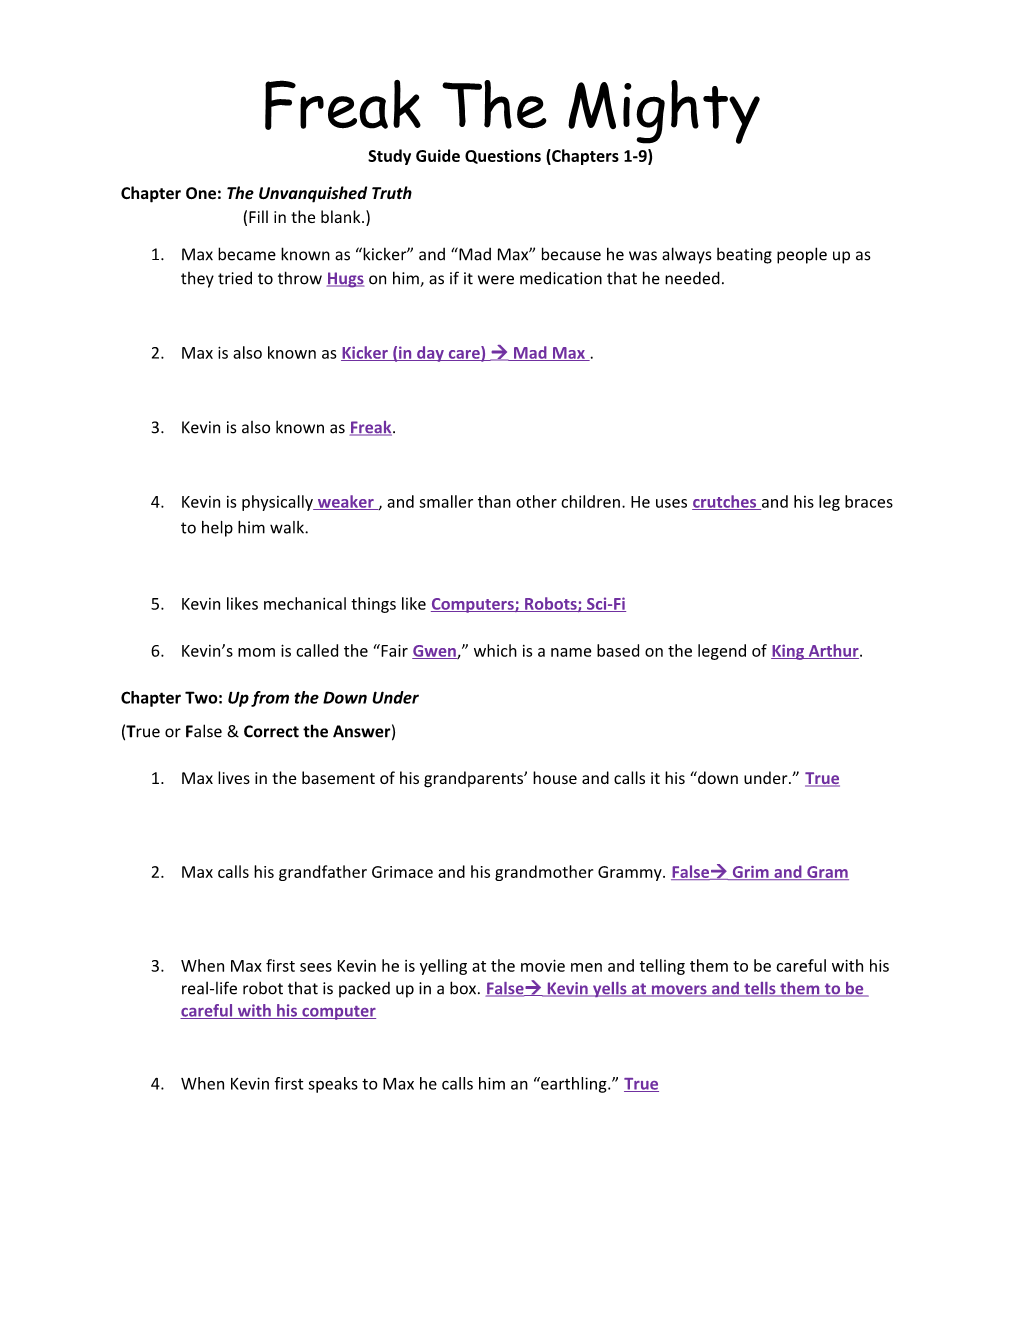 Study Guide Questions (Chapters 1-9)